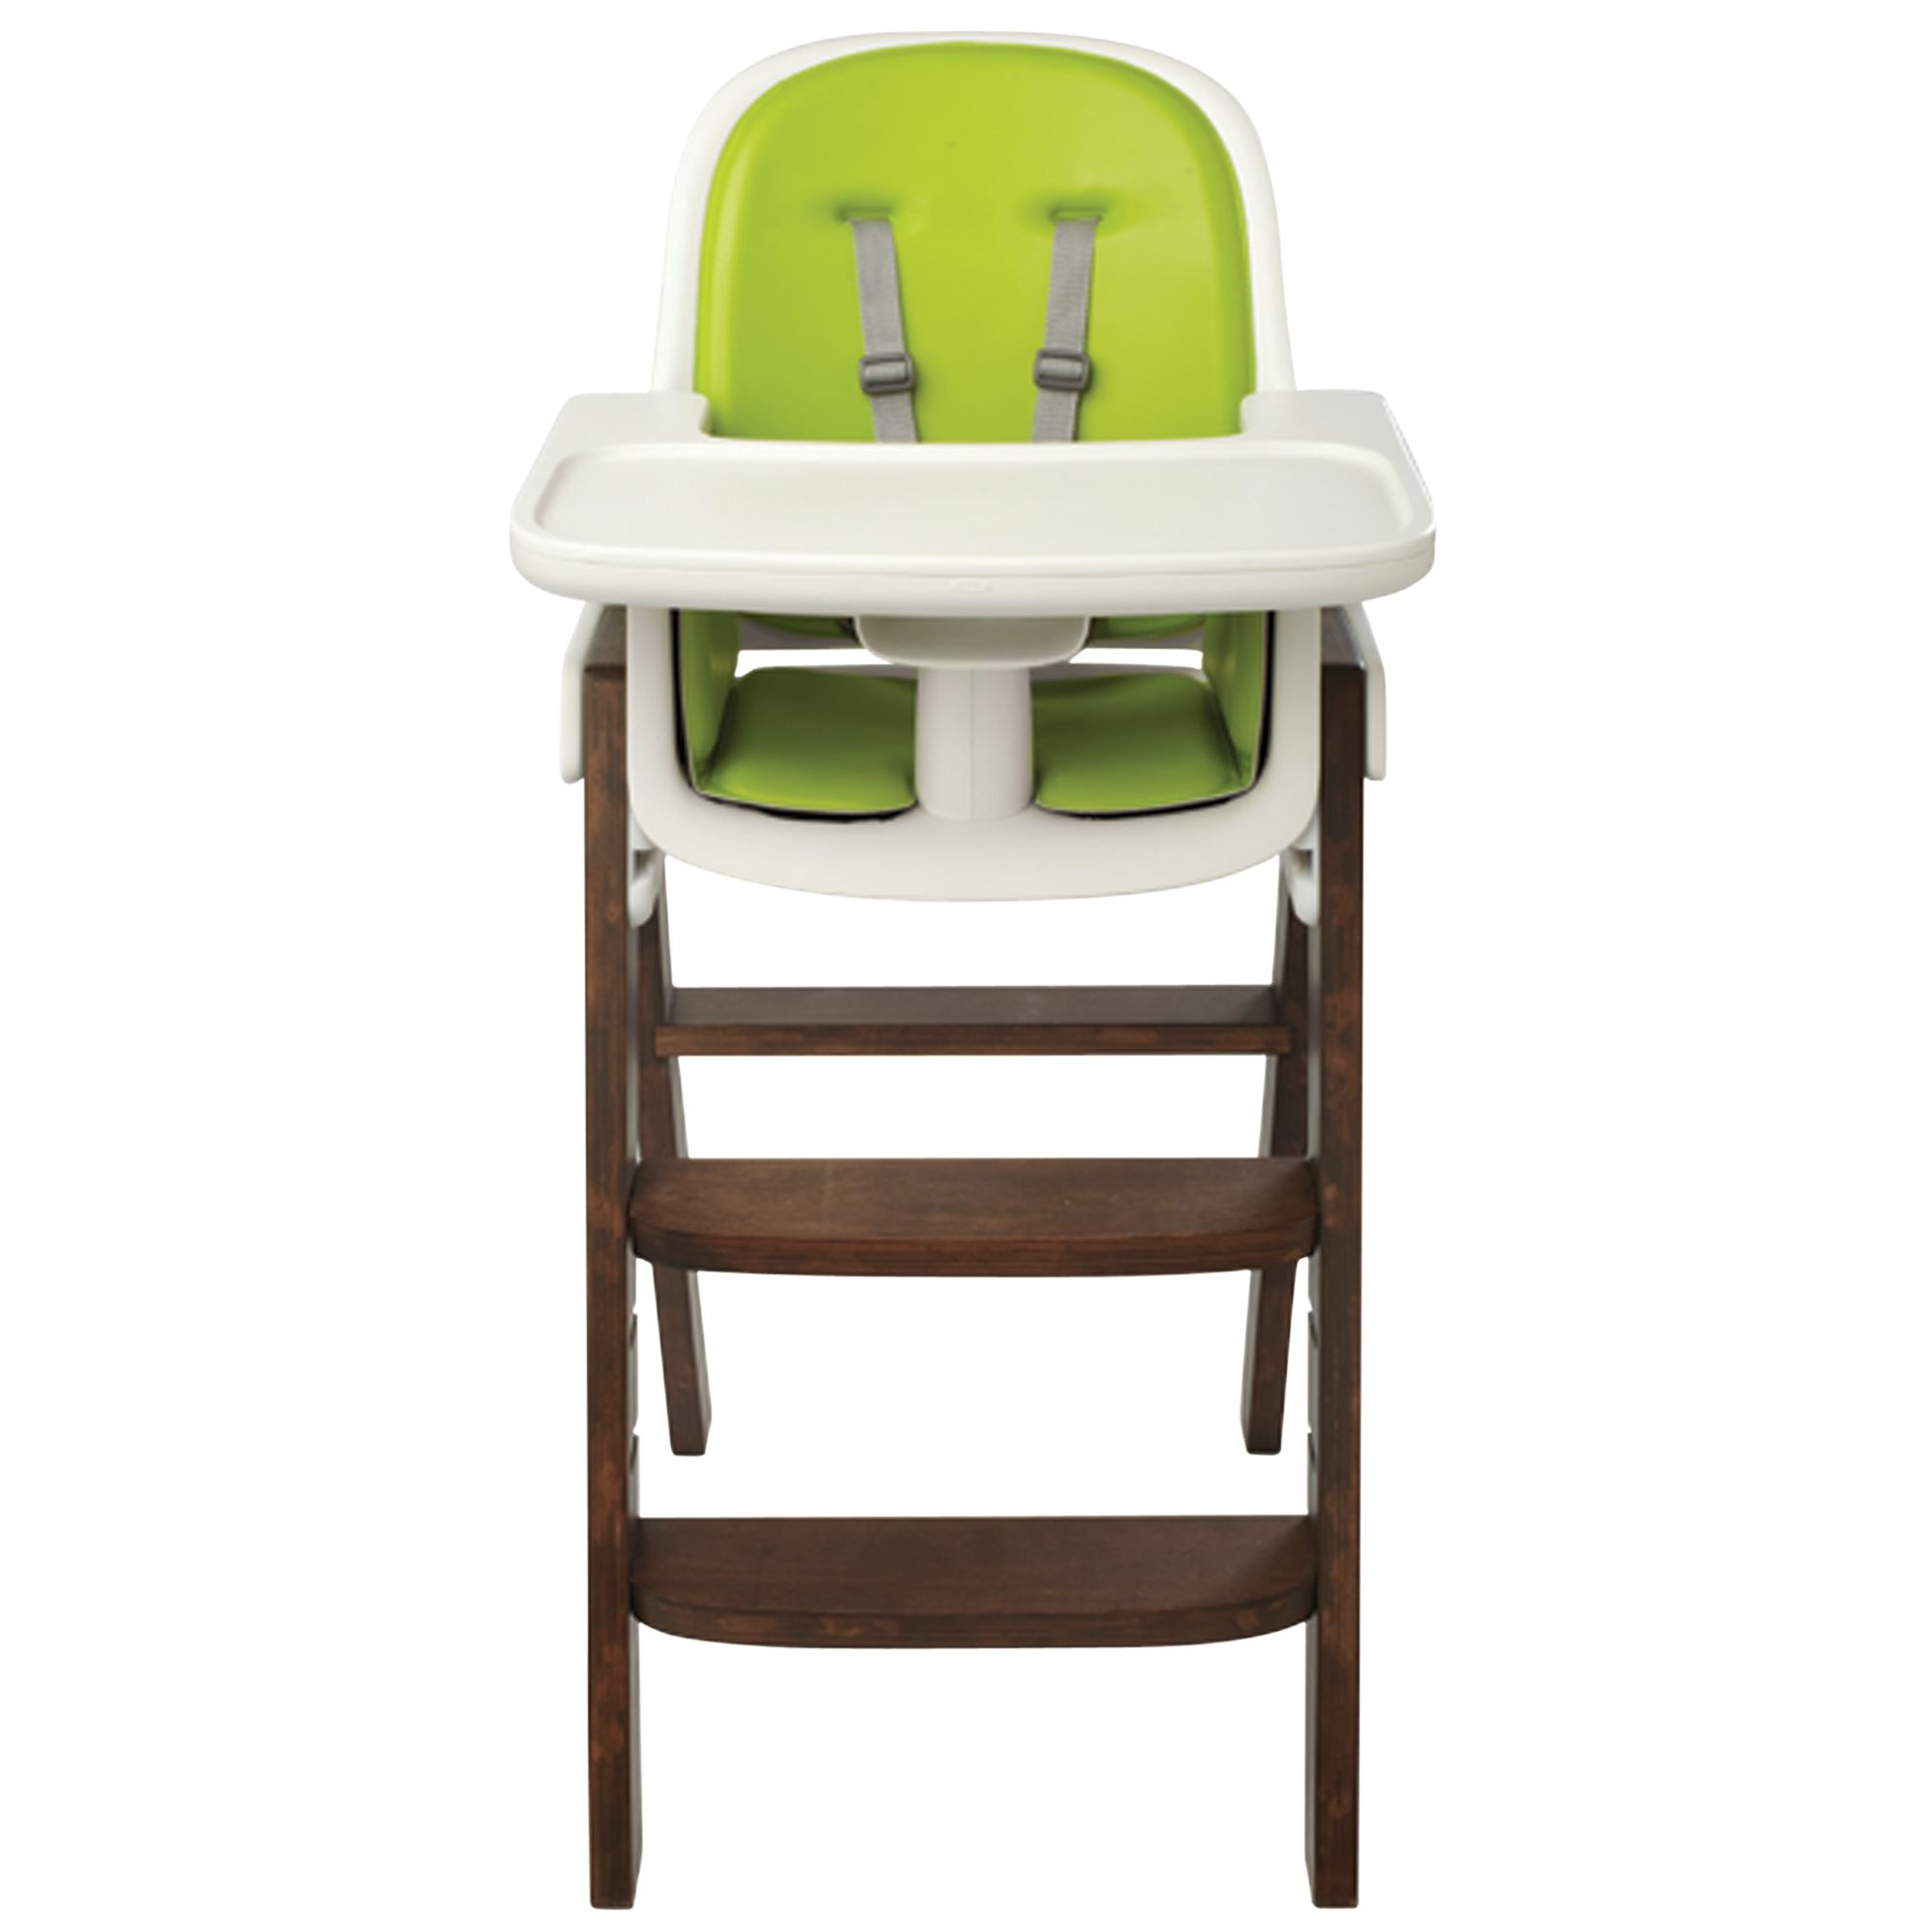 OXO Tot Sprout Highchair, Green/White at JohnLewis